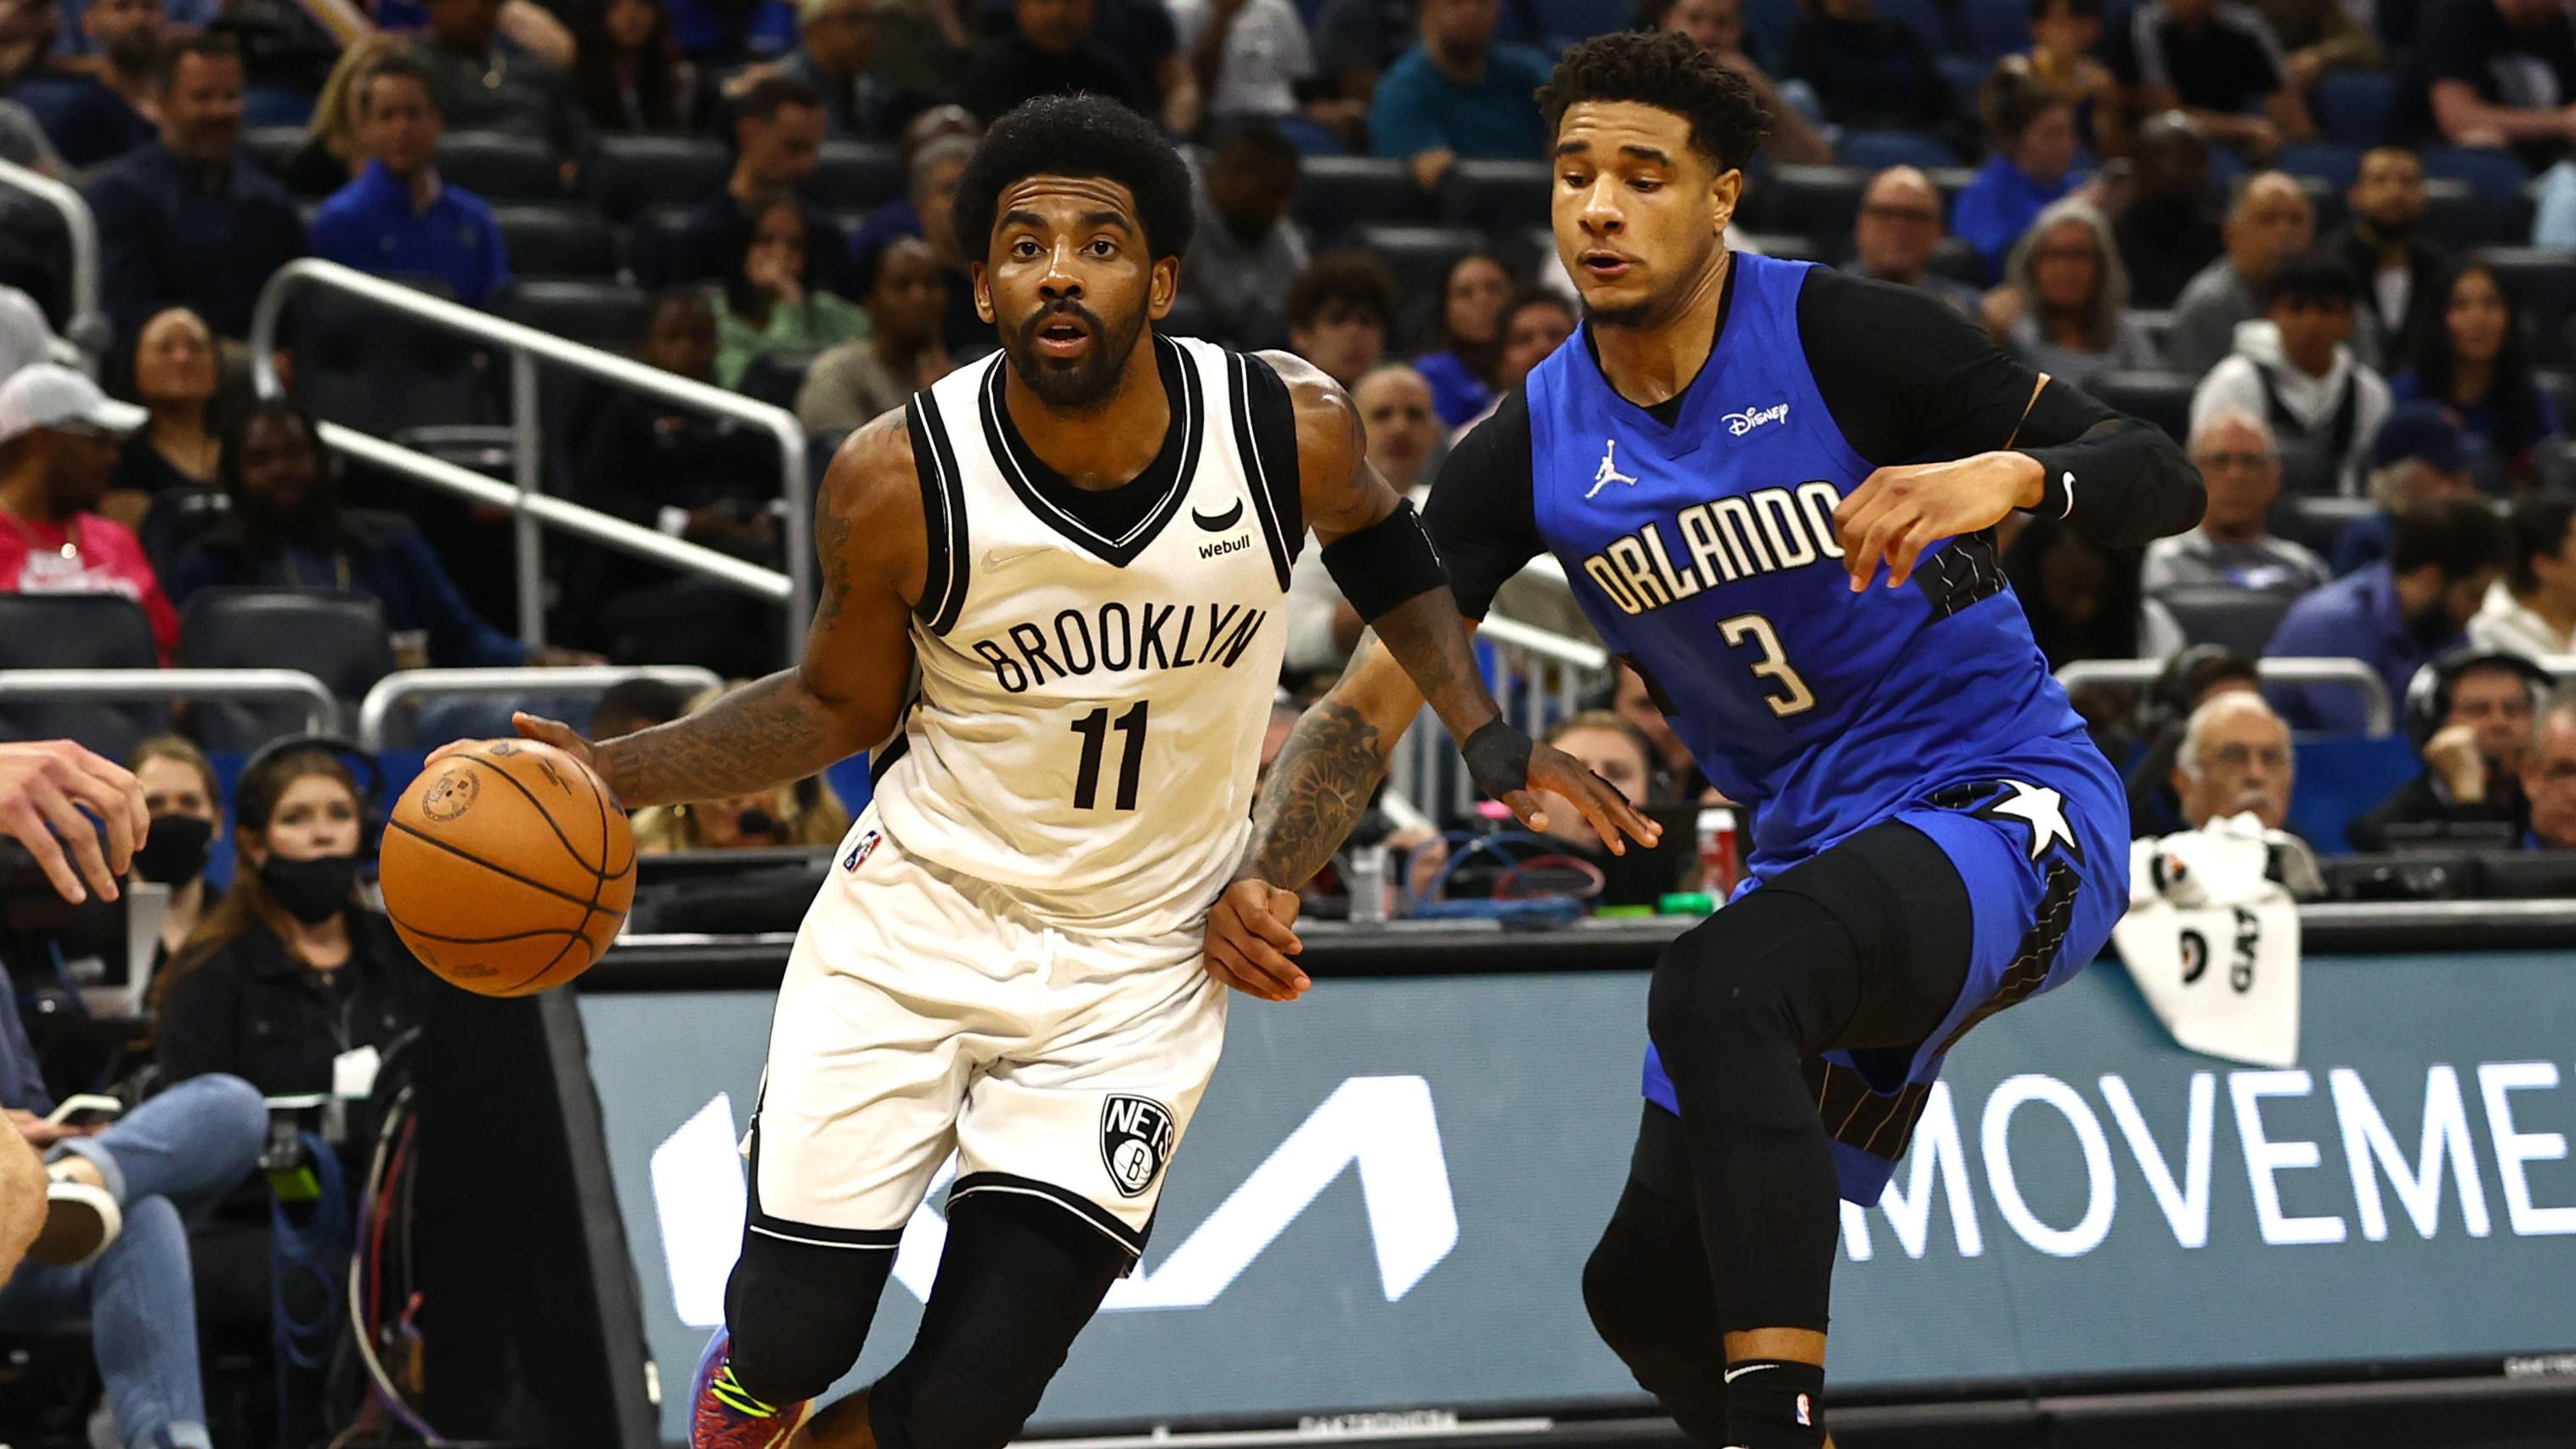 Mar 15, 2022; Orlando, Florida, USA; Brooklyn Nets guard Kyrie Irving (11) drives to the basket as Orlando Magic forward Chuma Okeke (3) defends during the second quarter at Amway Center. / Kim Klement-USA TODAY Sports